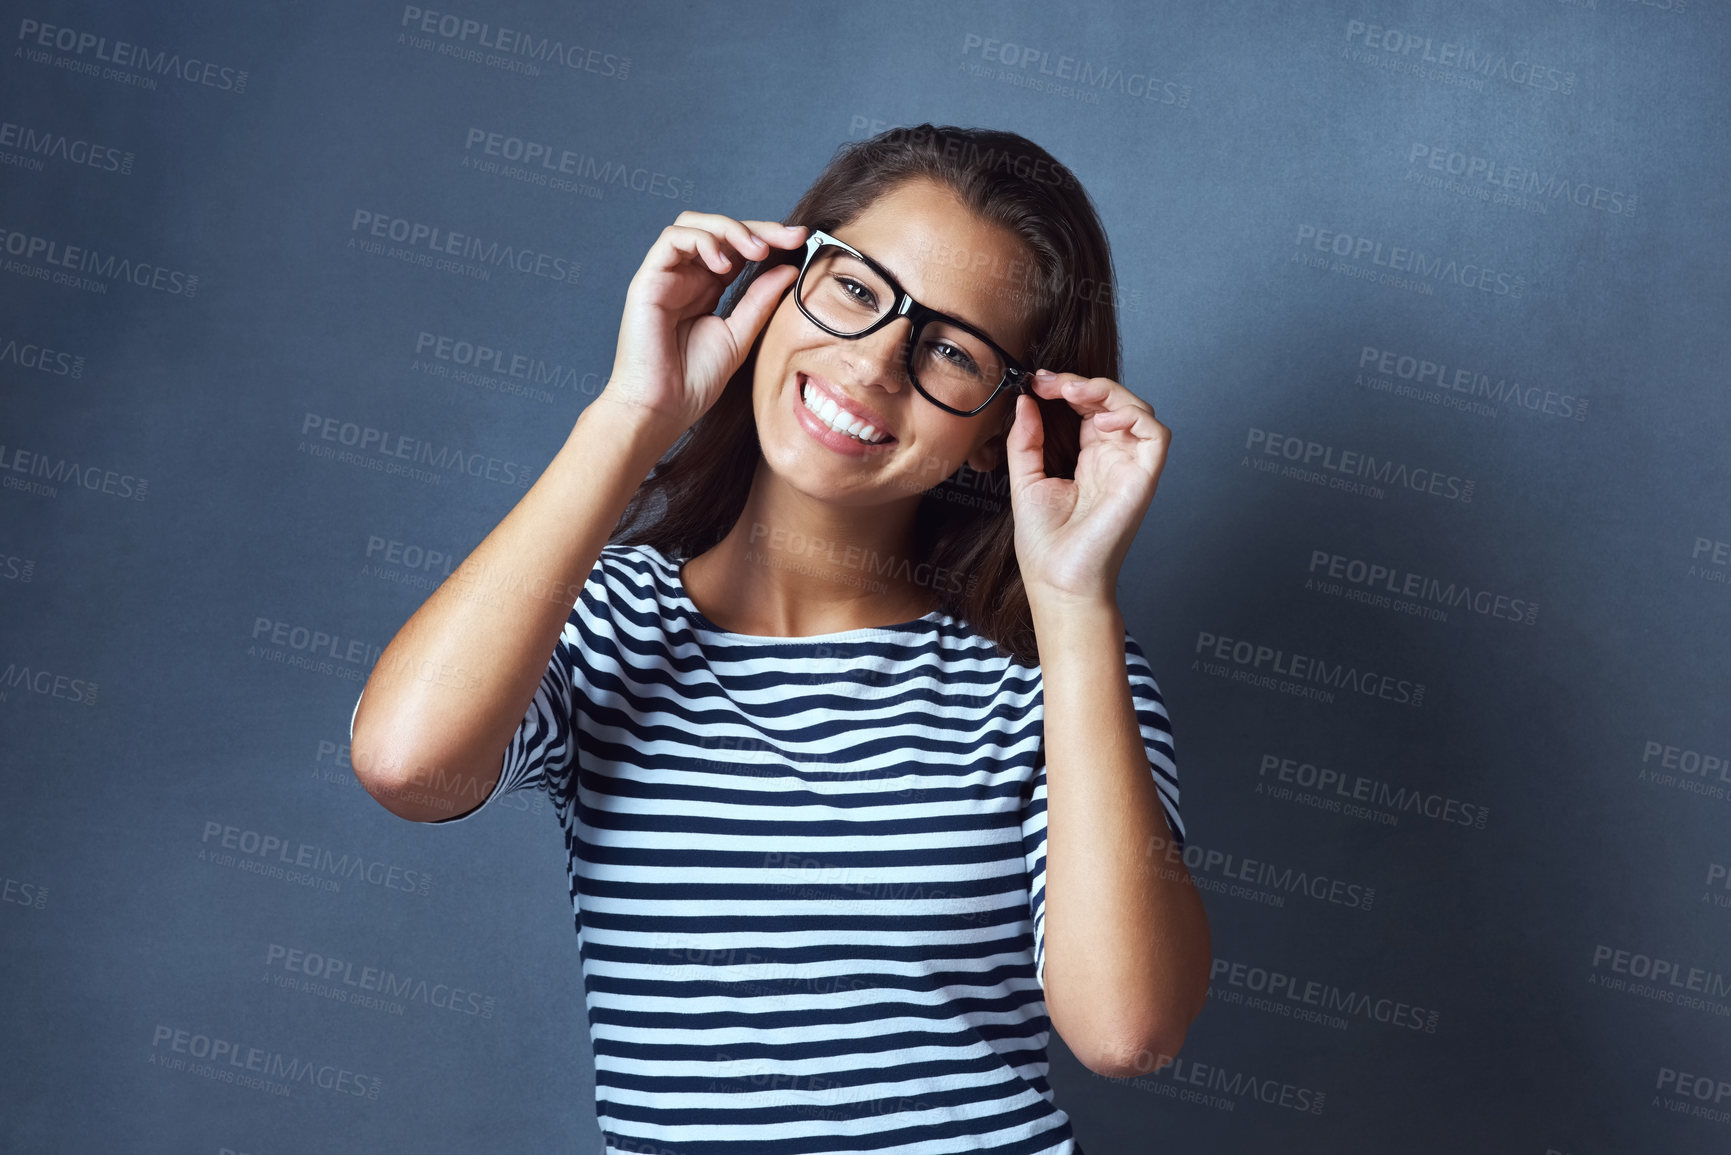 Buy stock photo Studio portrait of an attractive young woman wearing glasses against a dark background